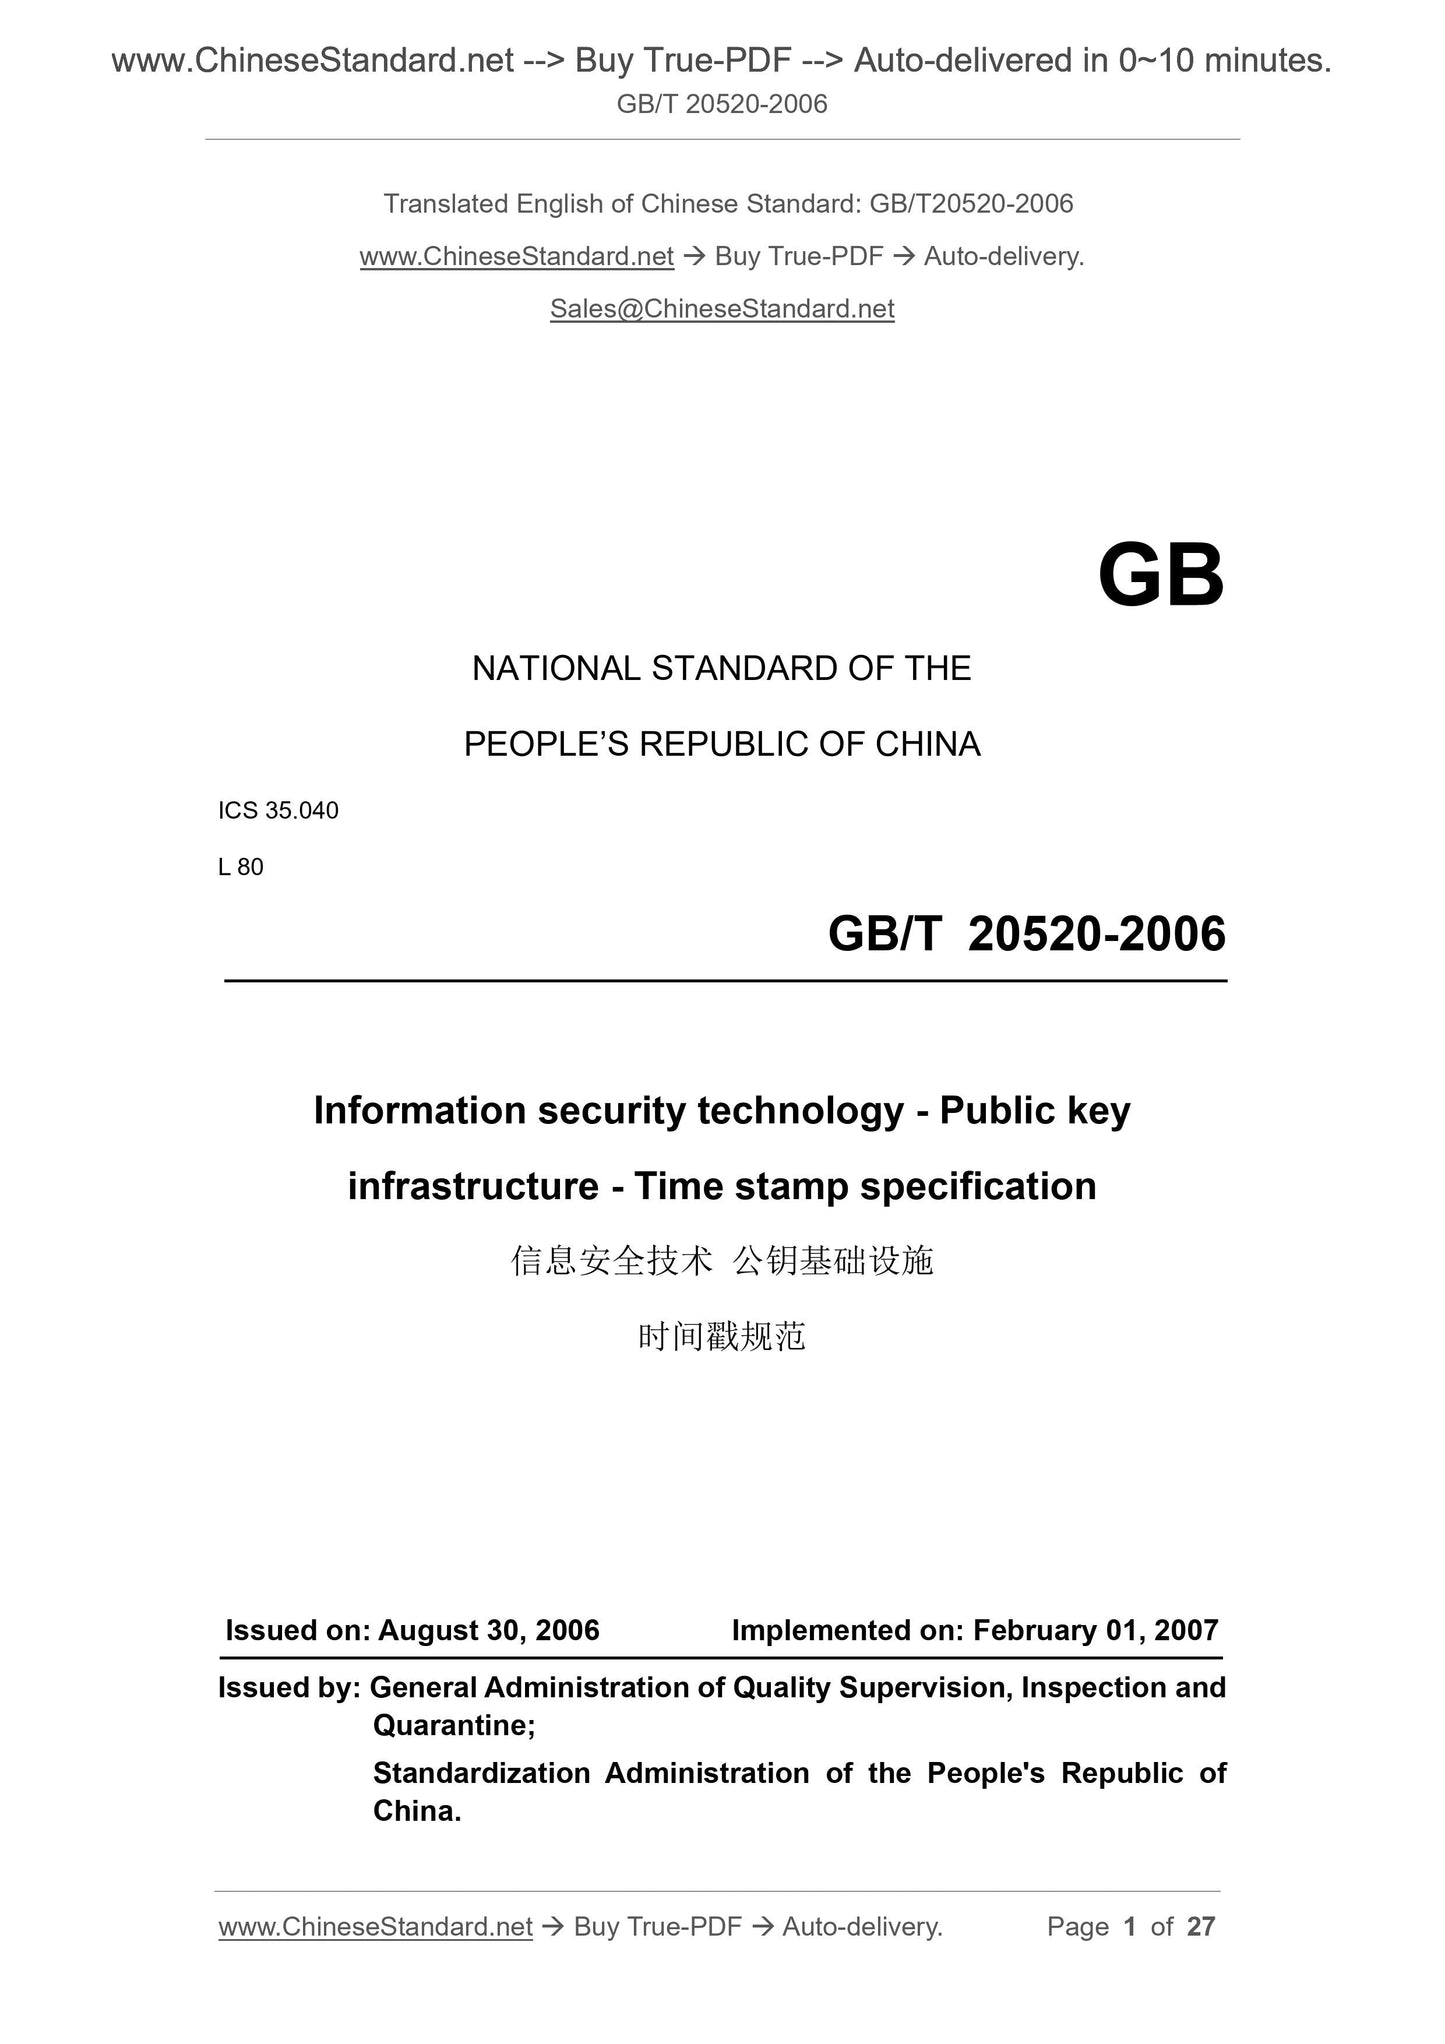 GB/T 20520-2006 Page 1